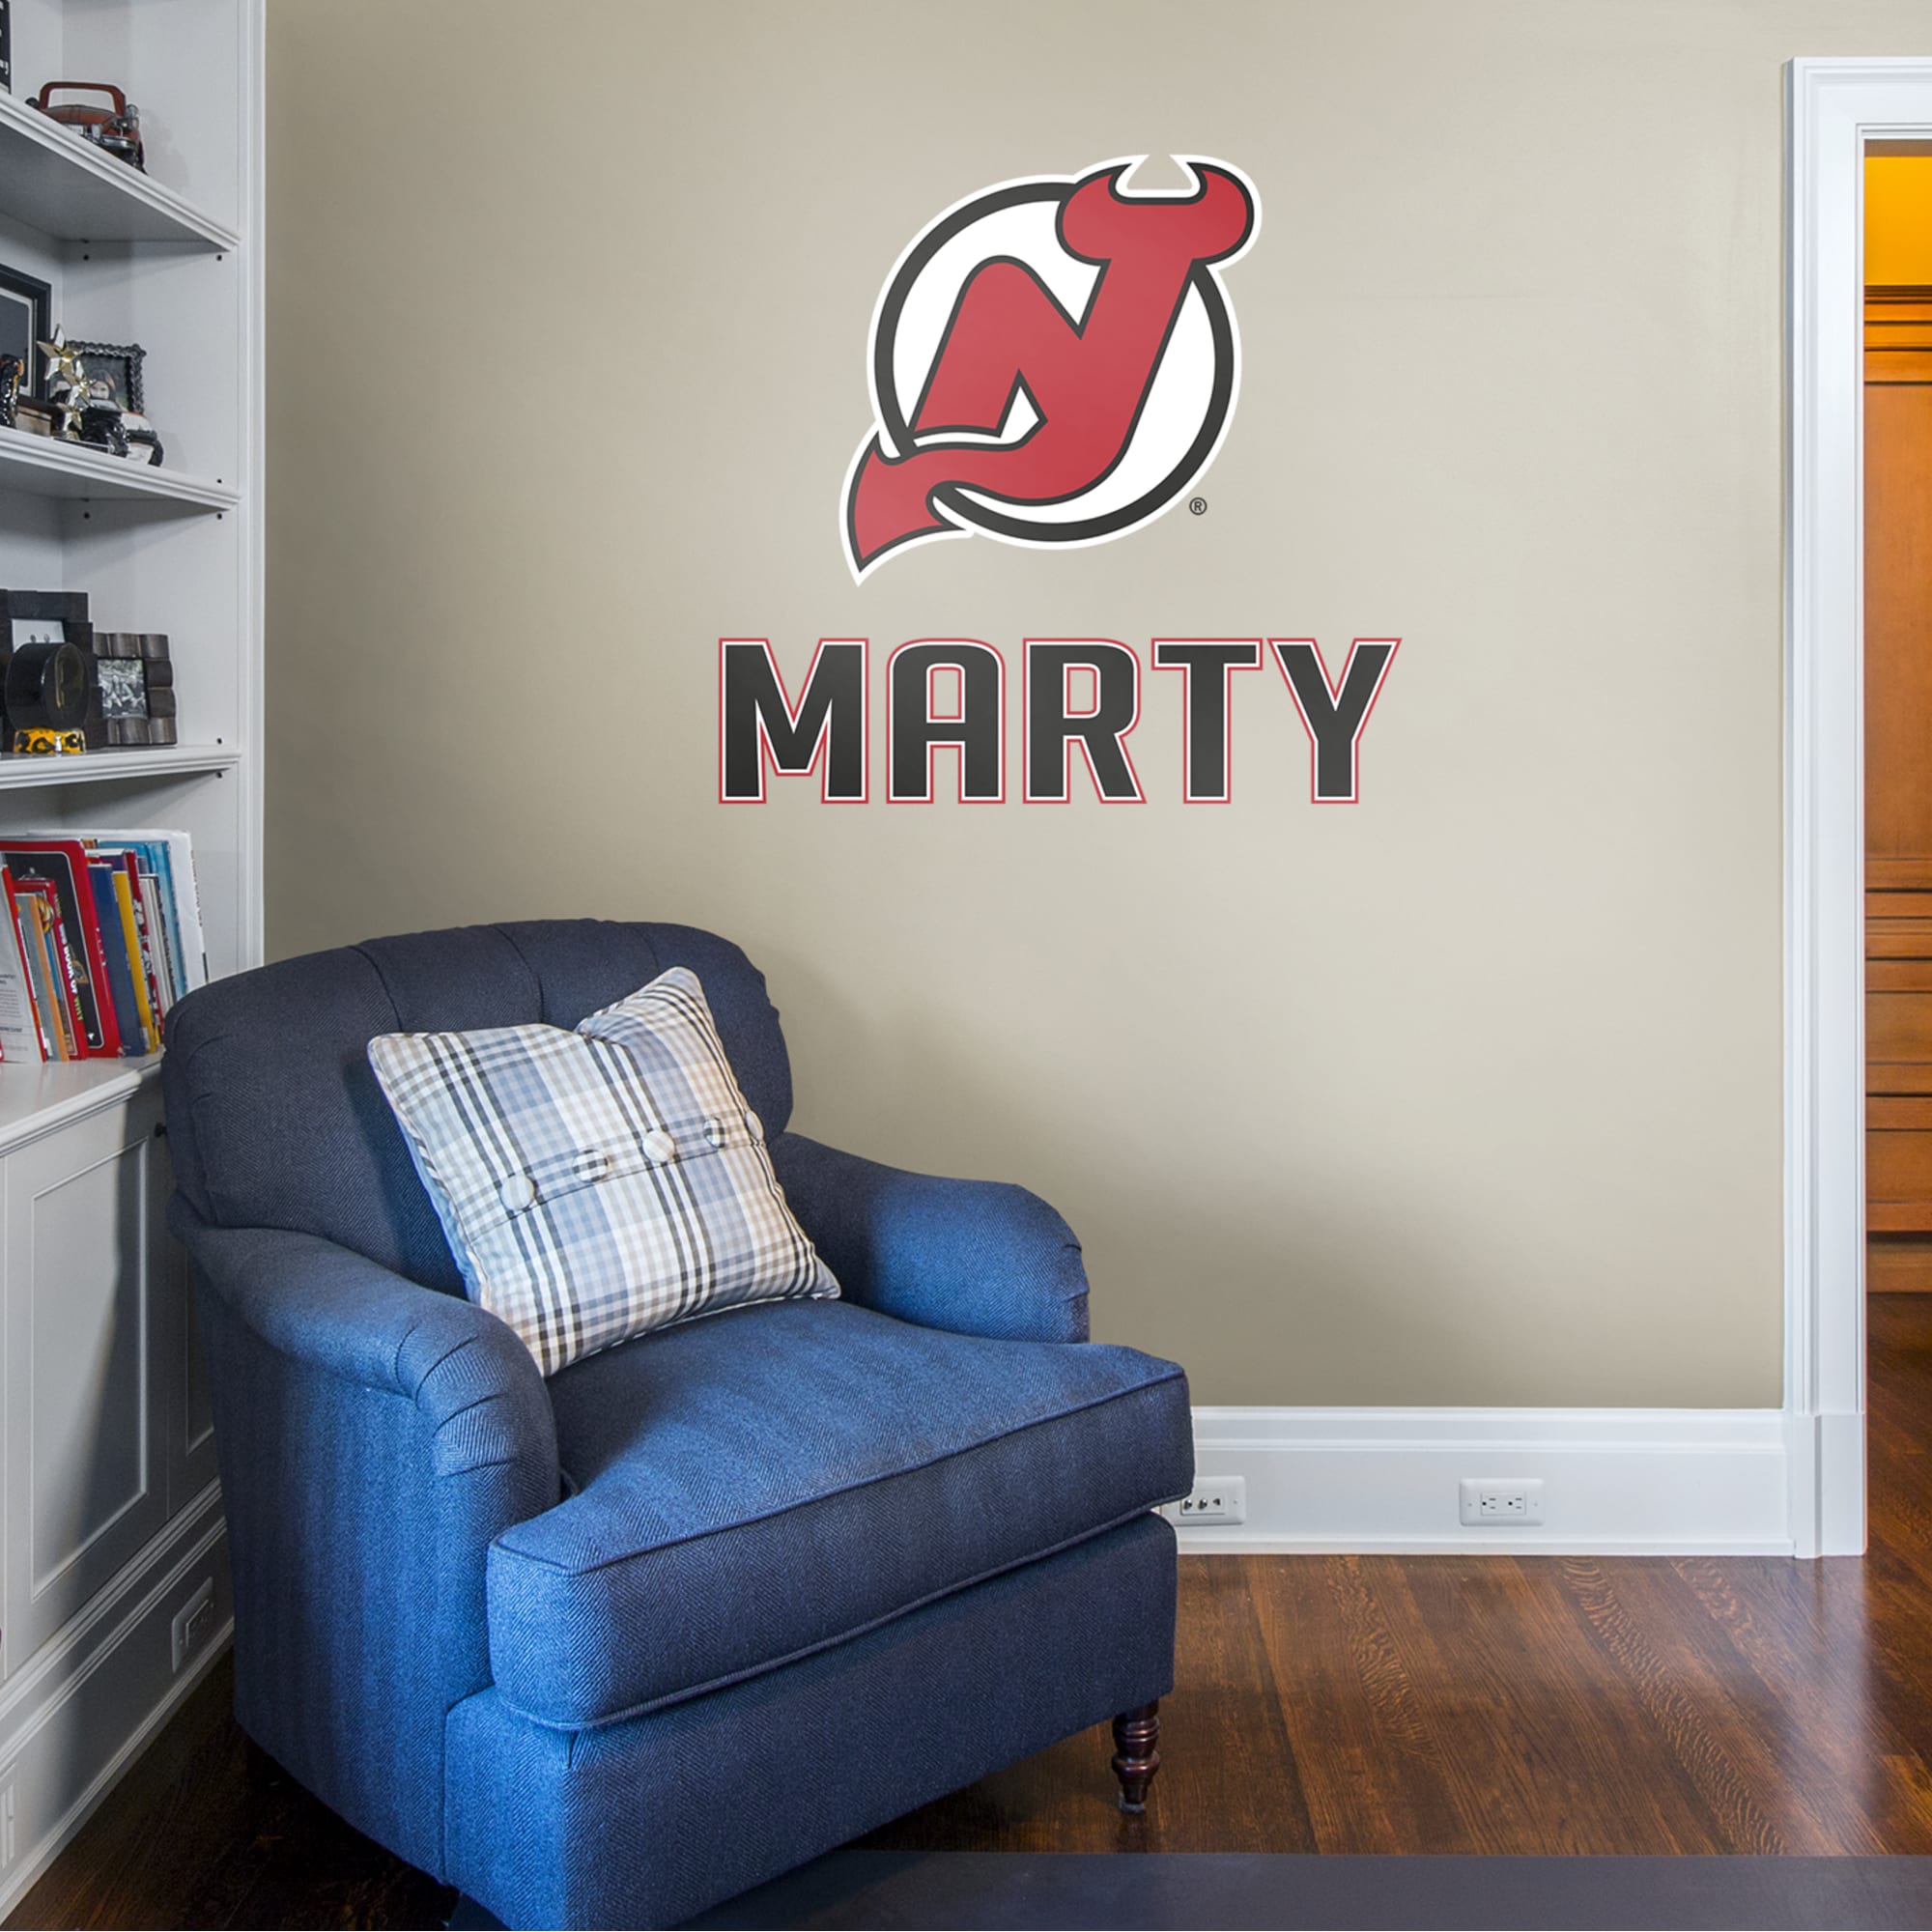 New Jersey Devils: Stacked Personalized Name - Officially Licensed NHL Transfer Decal in Black (39.5"W x 52"H) by Fathead | Viny